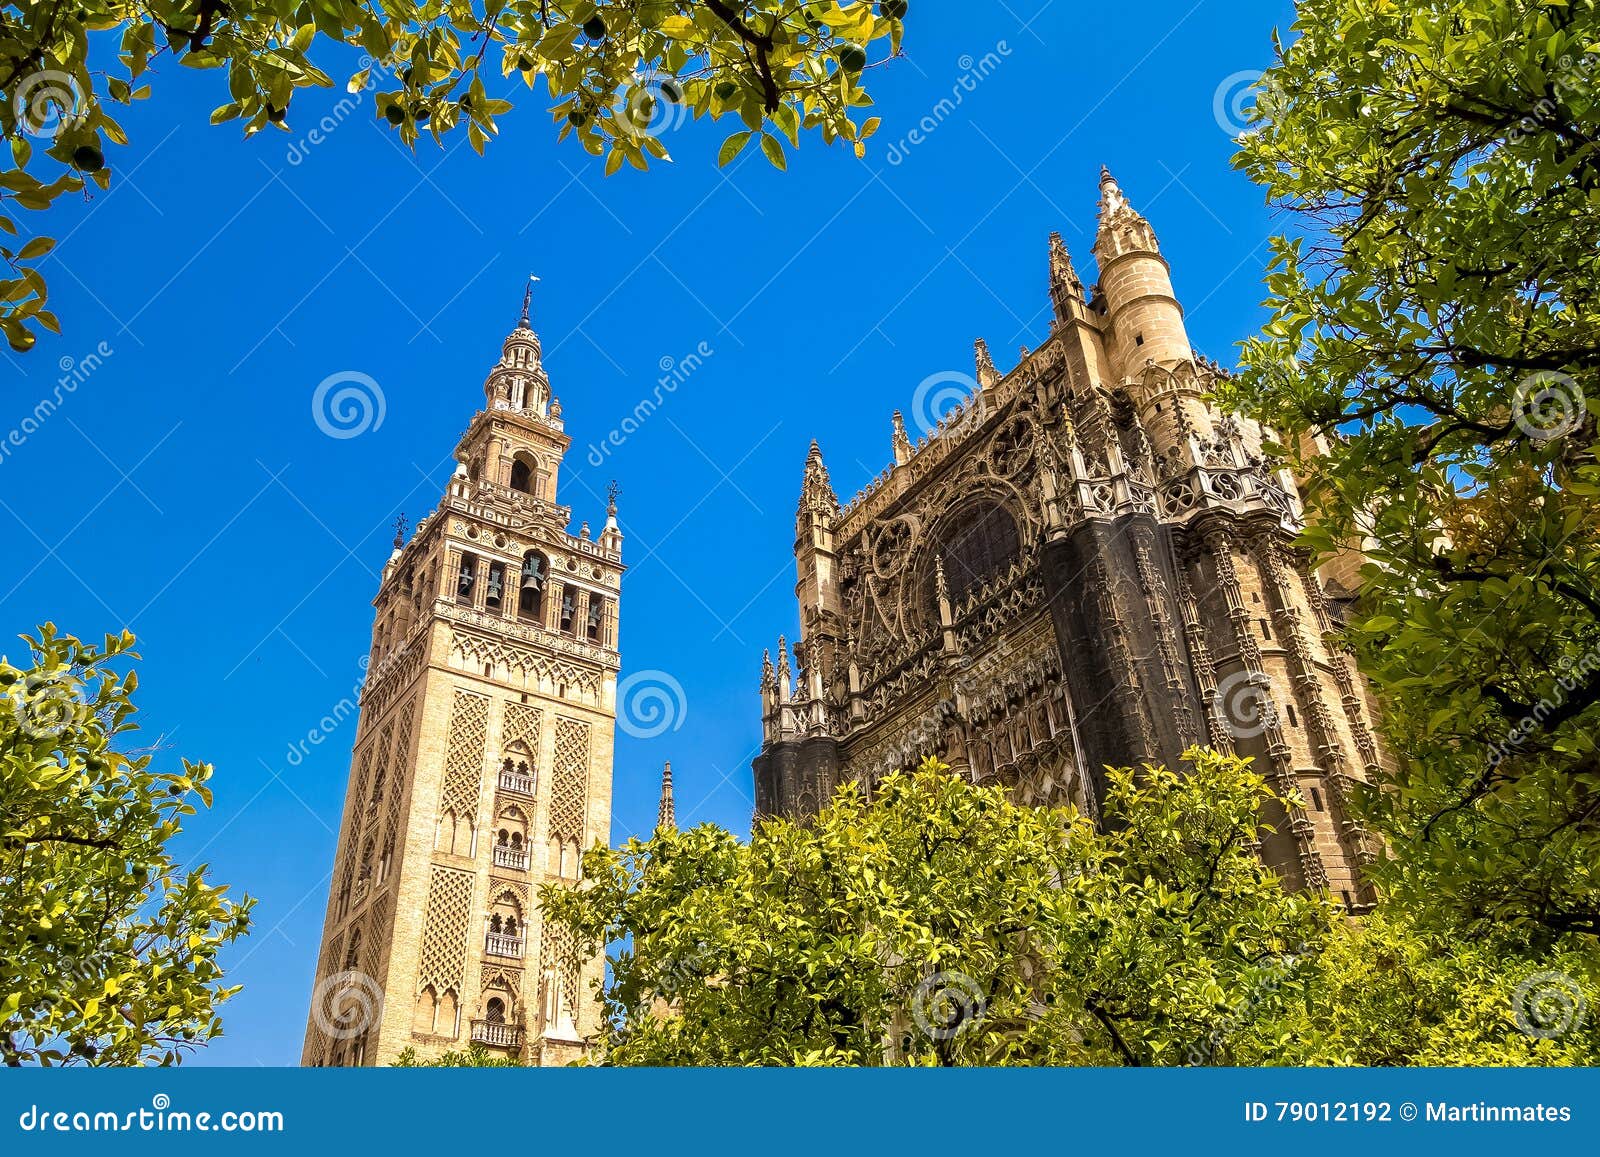 giralda and roof of the sevilla cathedral